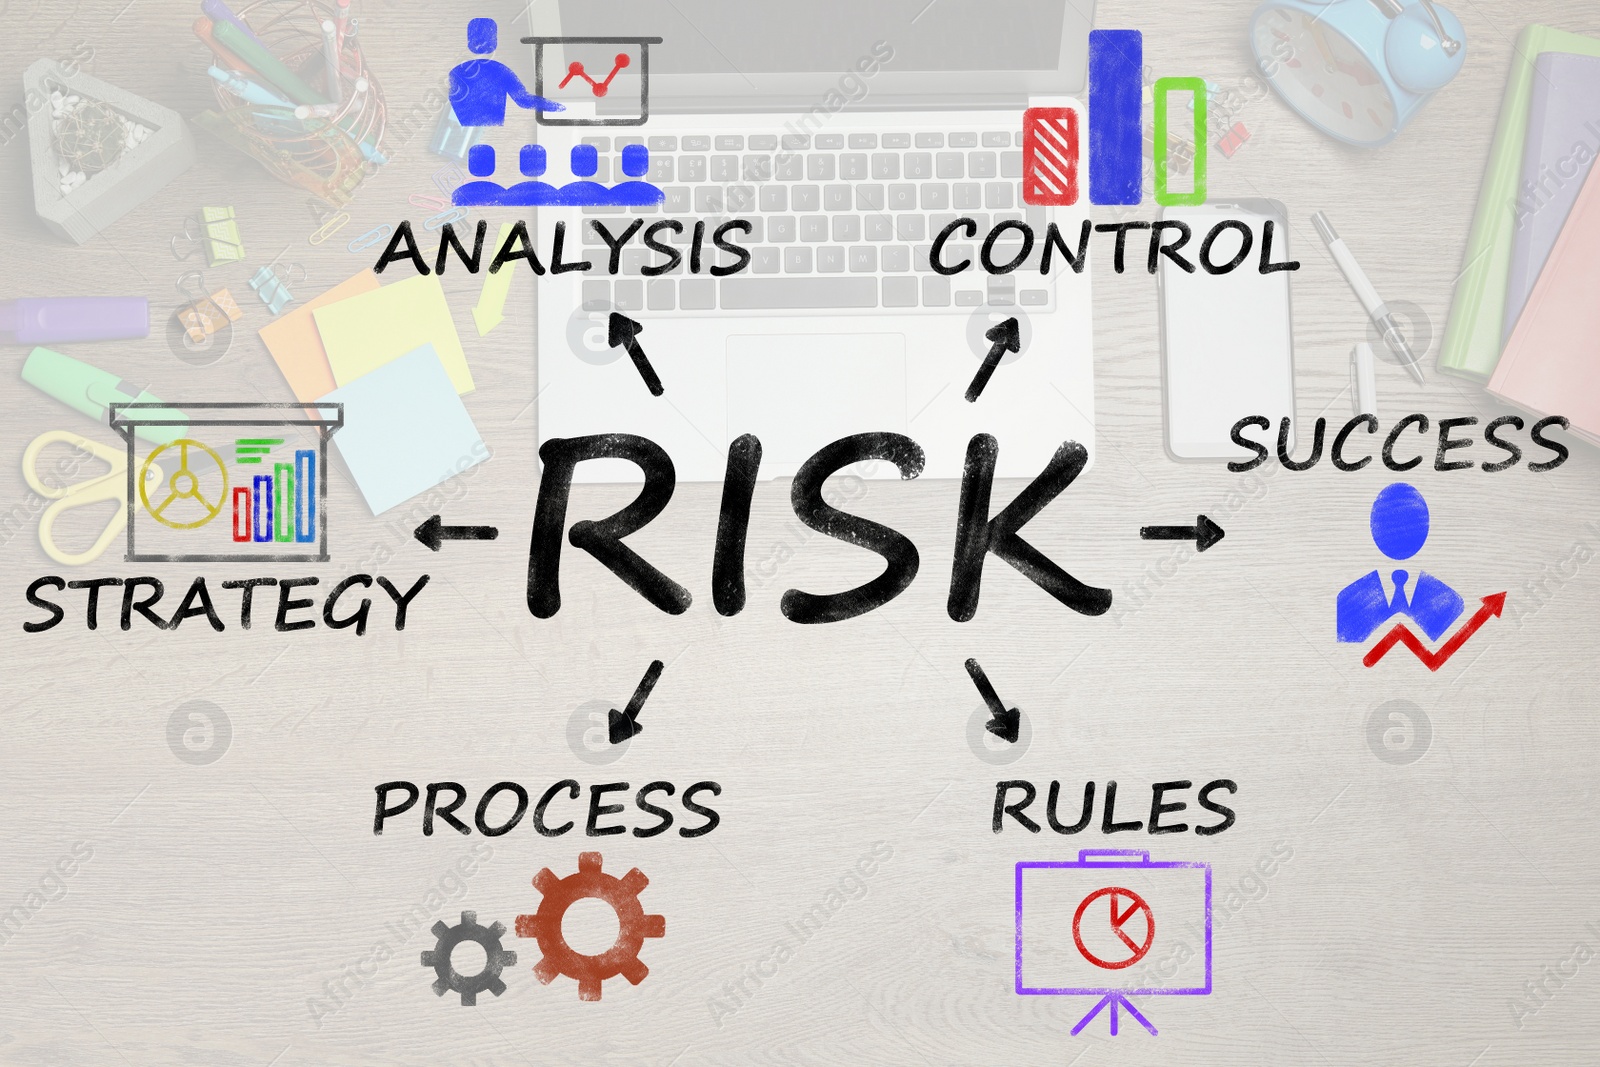 Image of Management risk scheme and workplace on background